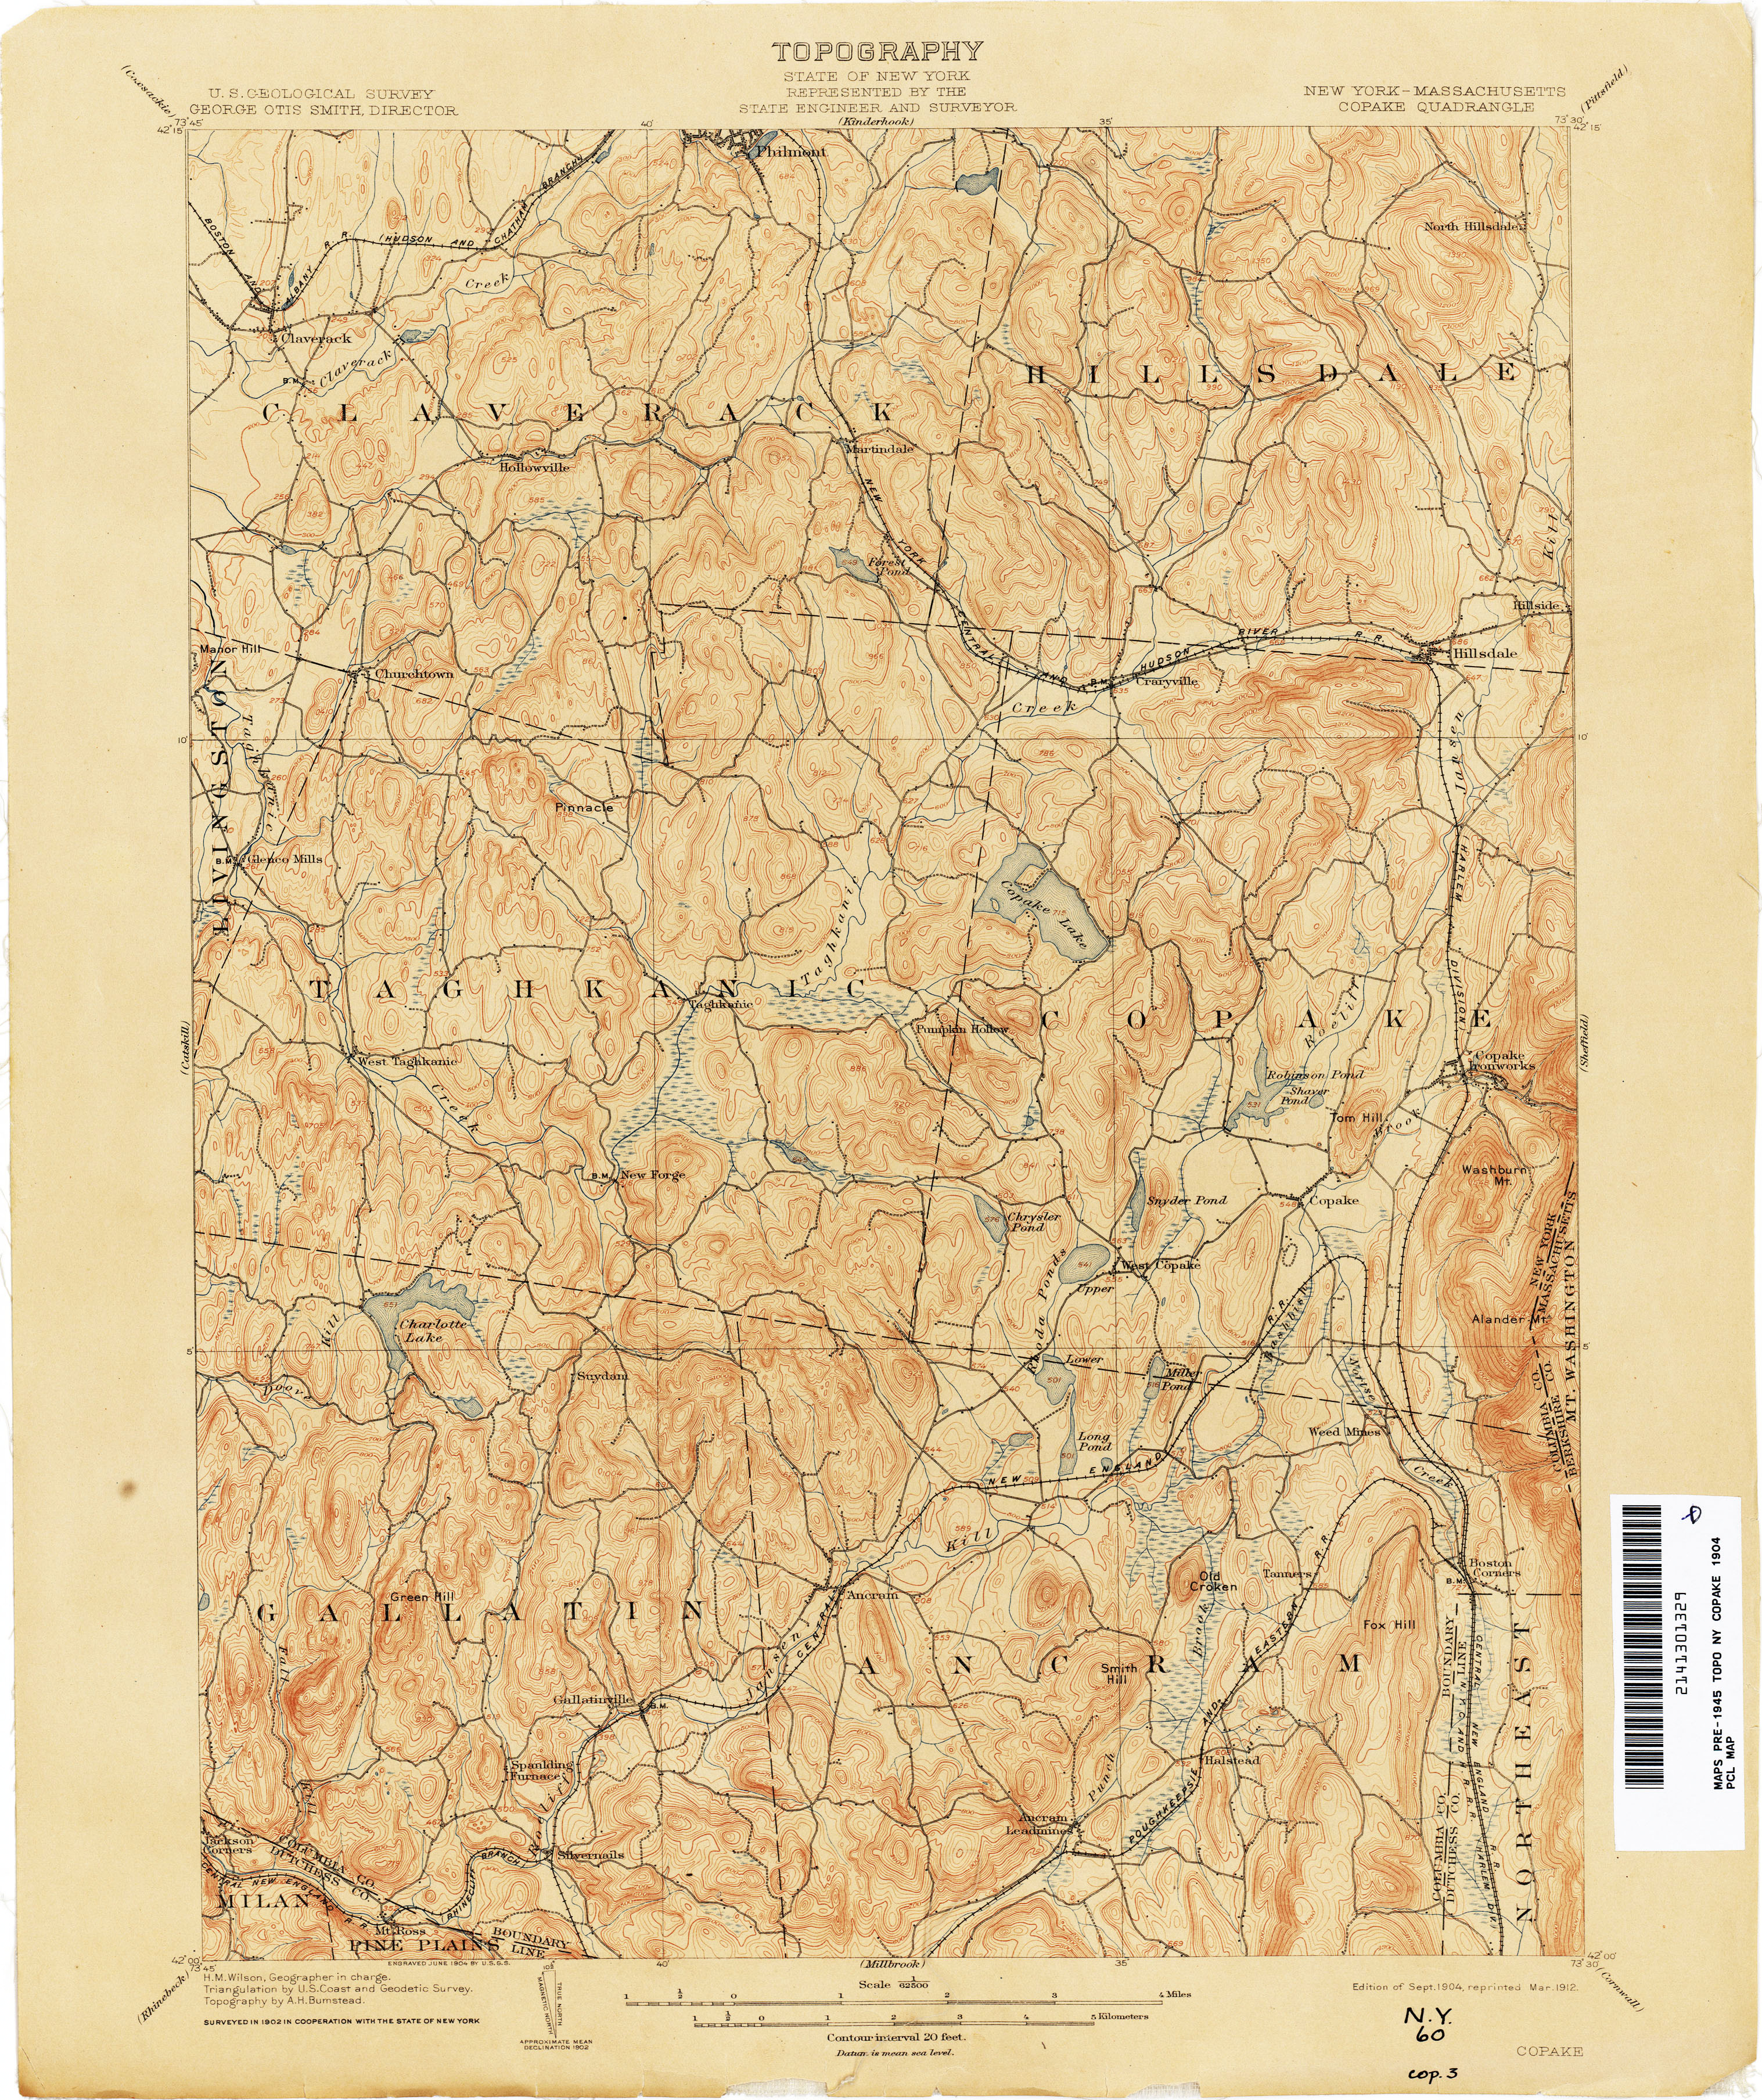 Carlisle Antique Billerica Massachusetts 1965 US Geological Survey Topographic Map \u2013 Middlesex County MA Chelmsford Tewksbury Concord